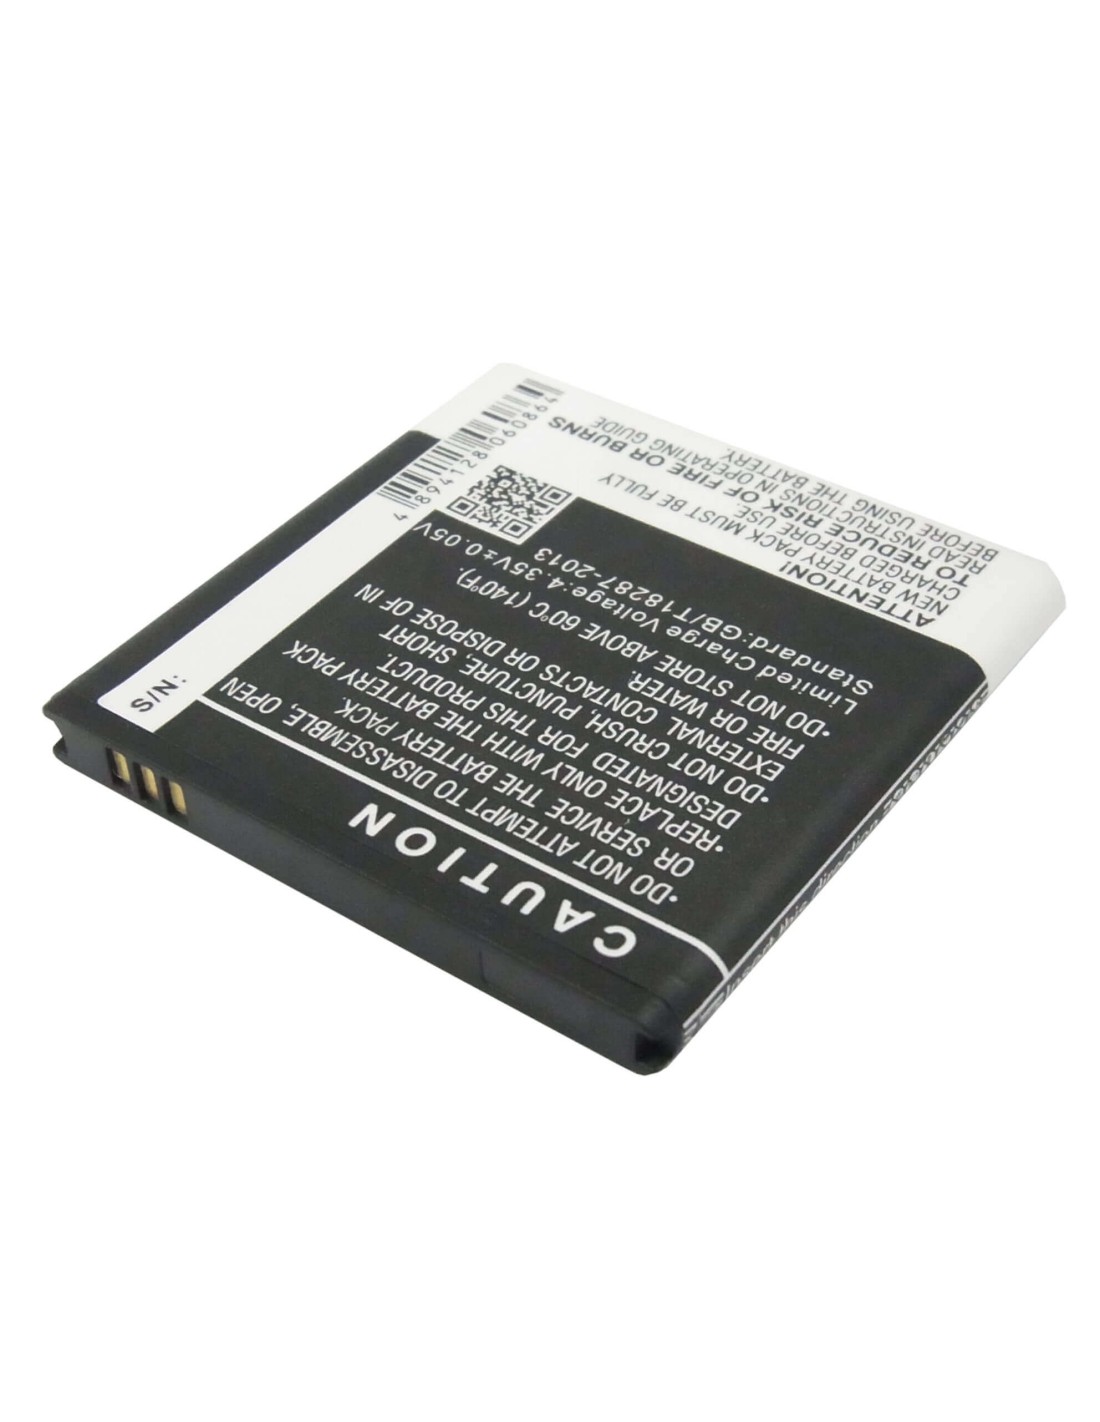 Battery for Samsung GT-i9070, GT-i9070P, Galaxy S Advance 3.8V, 1600mAh - 6.08Wh